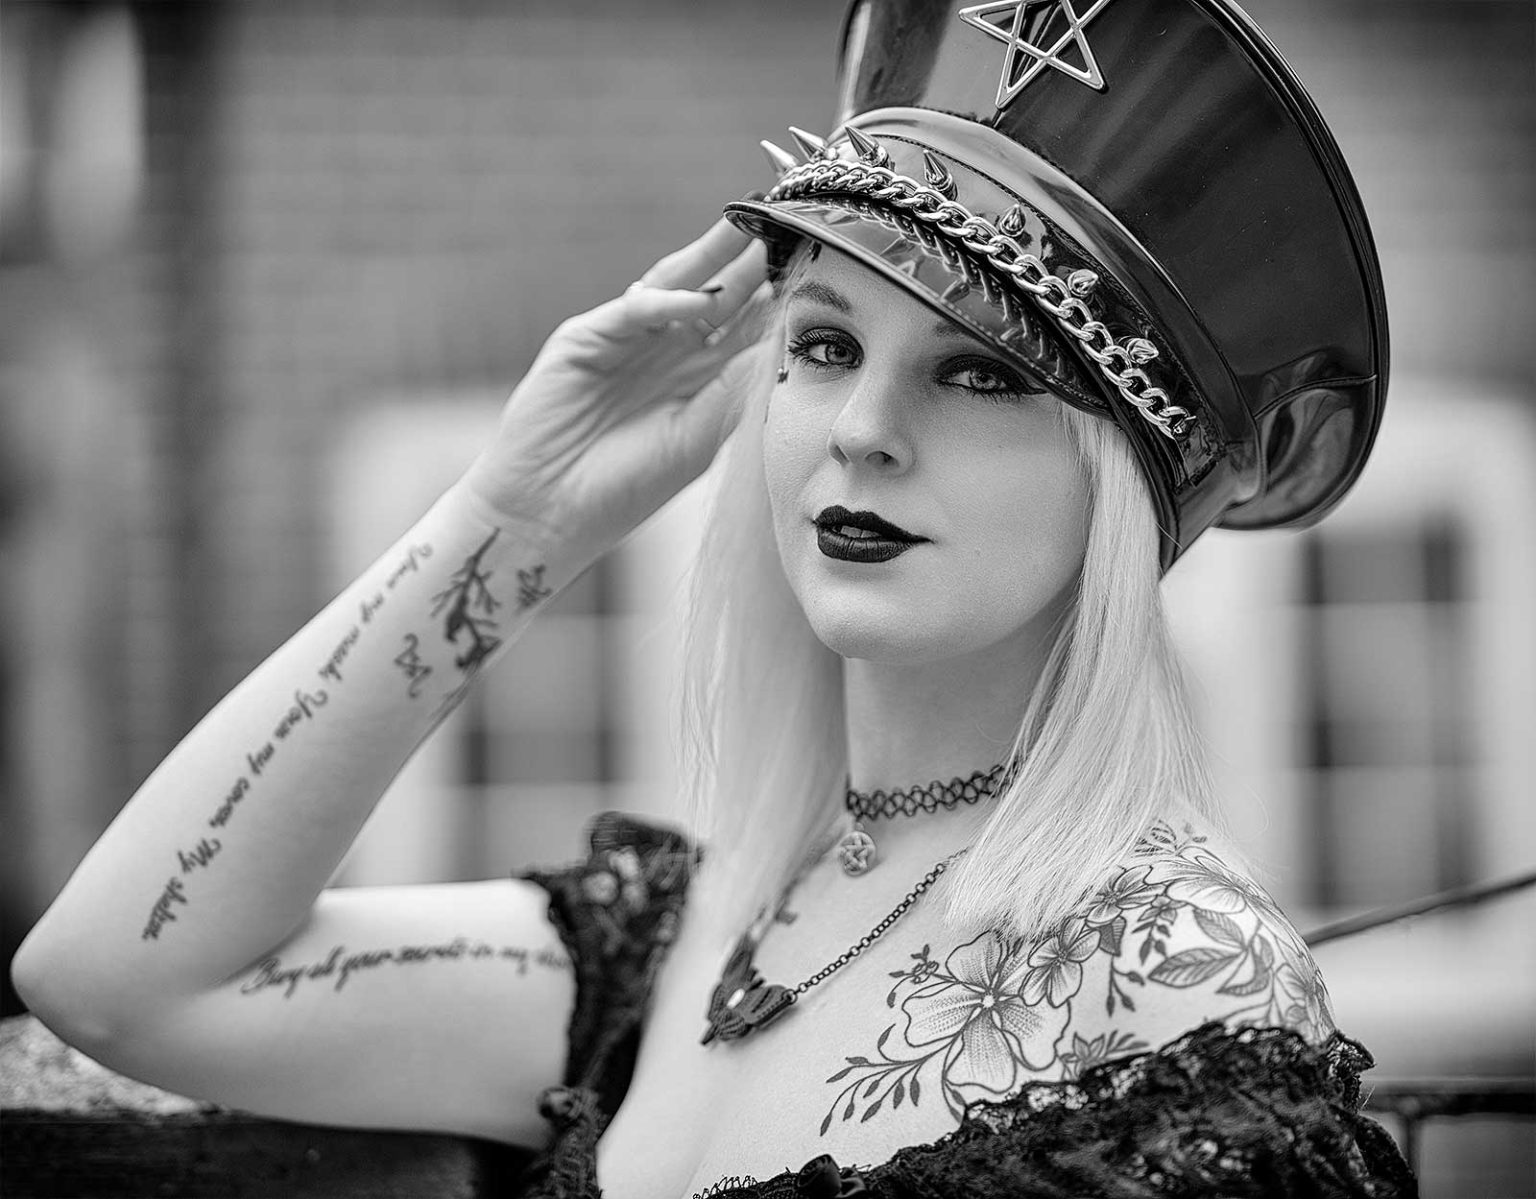 Black and white portrait of N J Barley taken at the Whitby Goth Weekend in April 2022